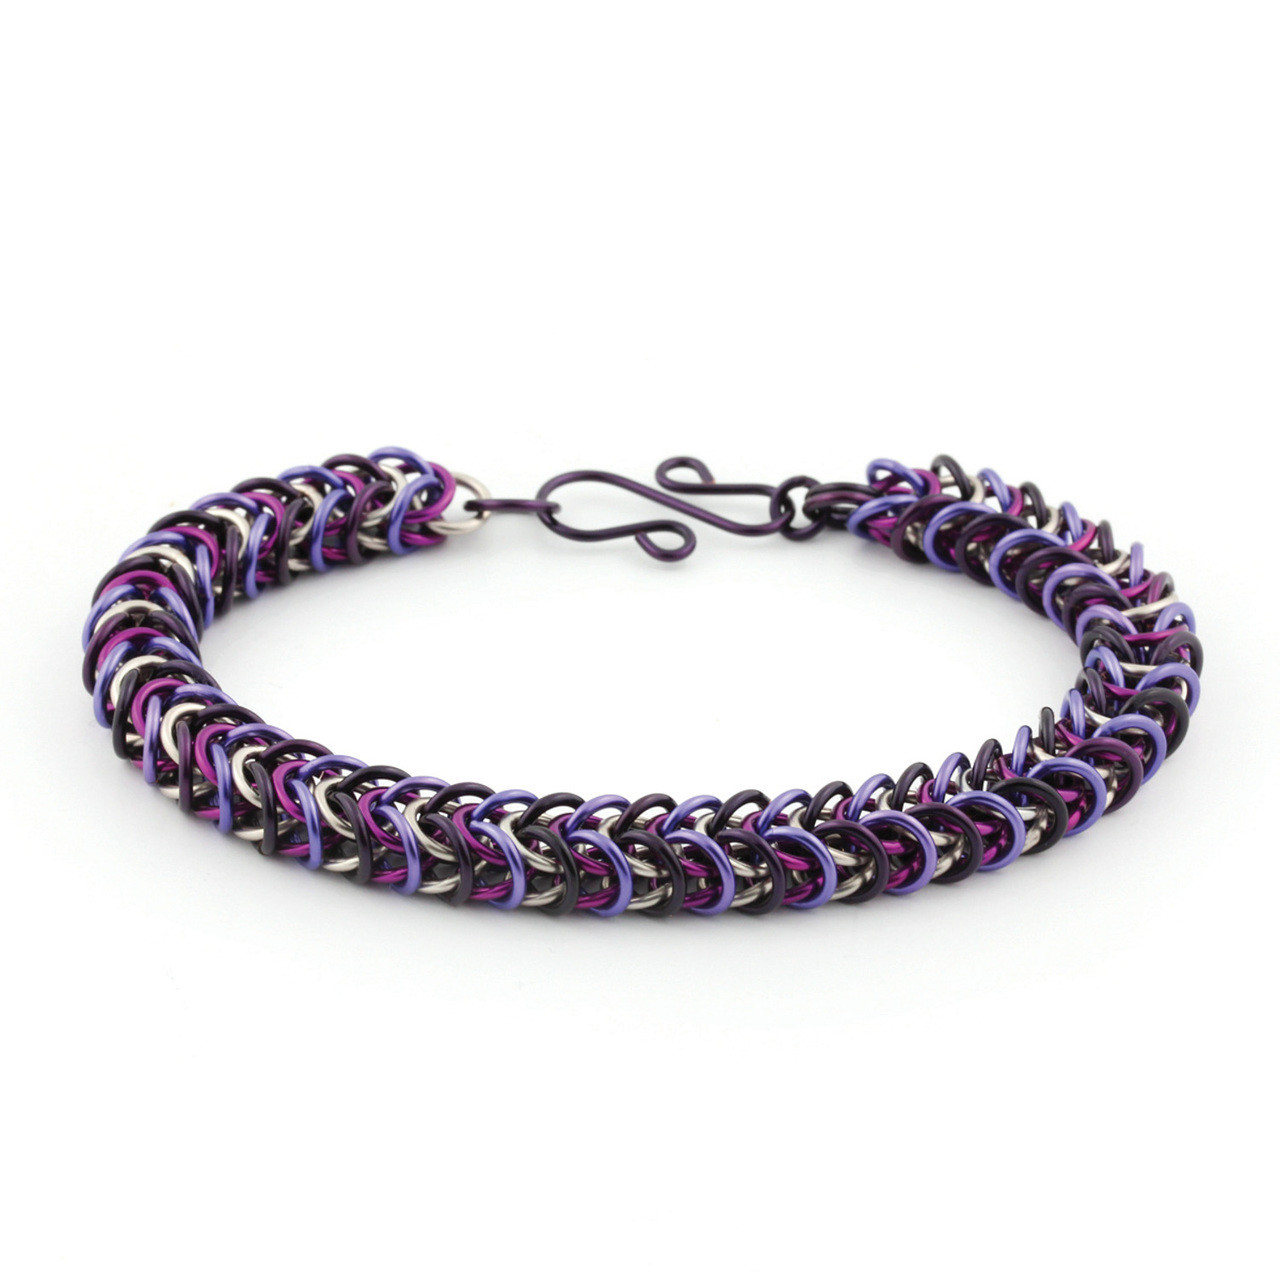 Weave Got Maille Chain Maille Box Chain Bracelet Kit - Cleopatra